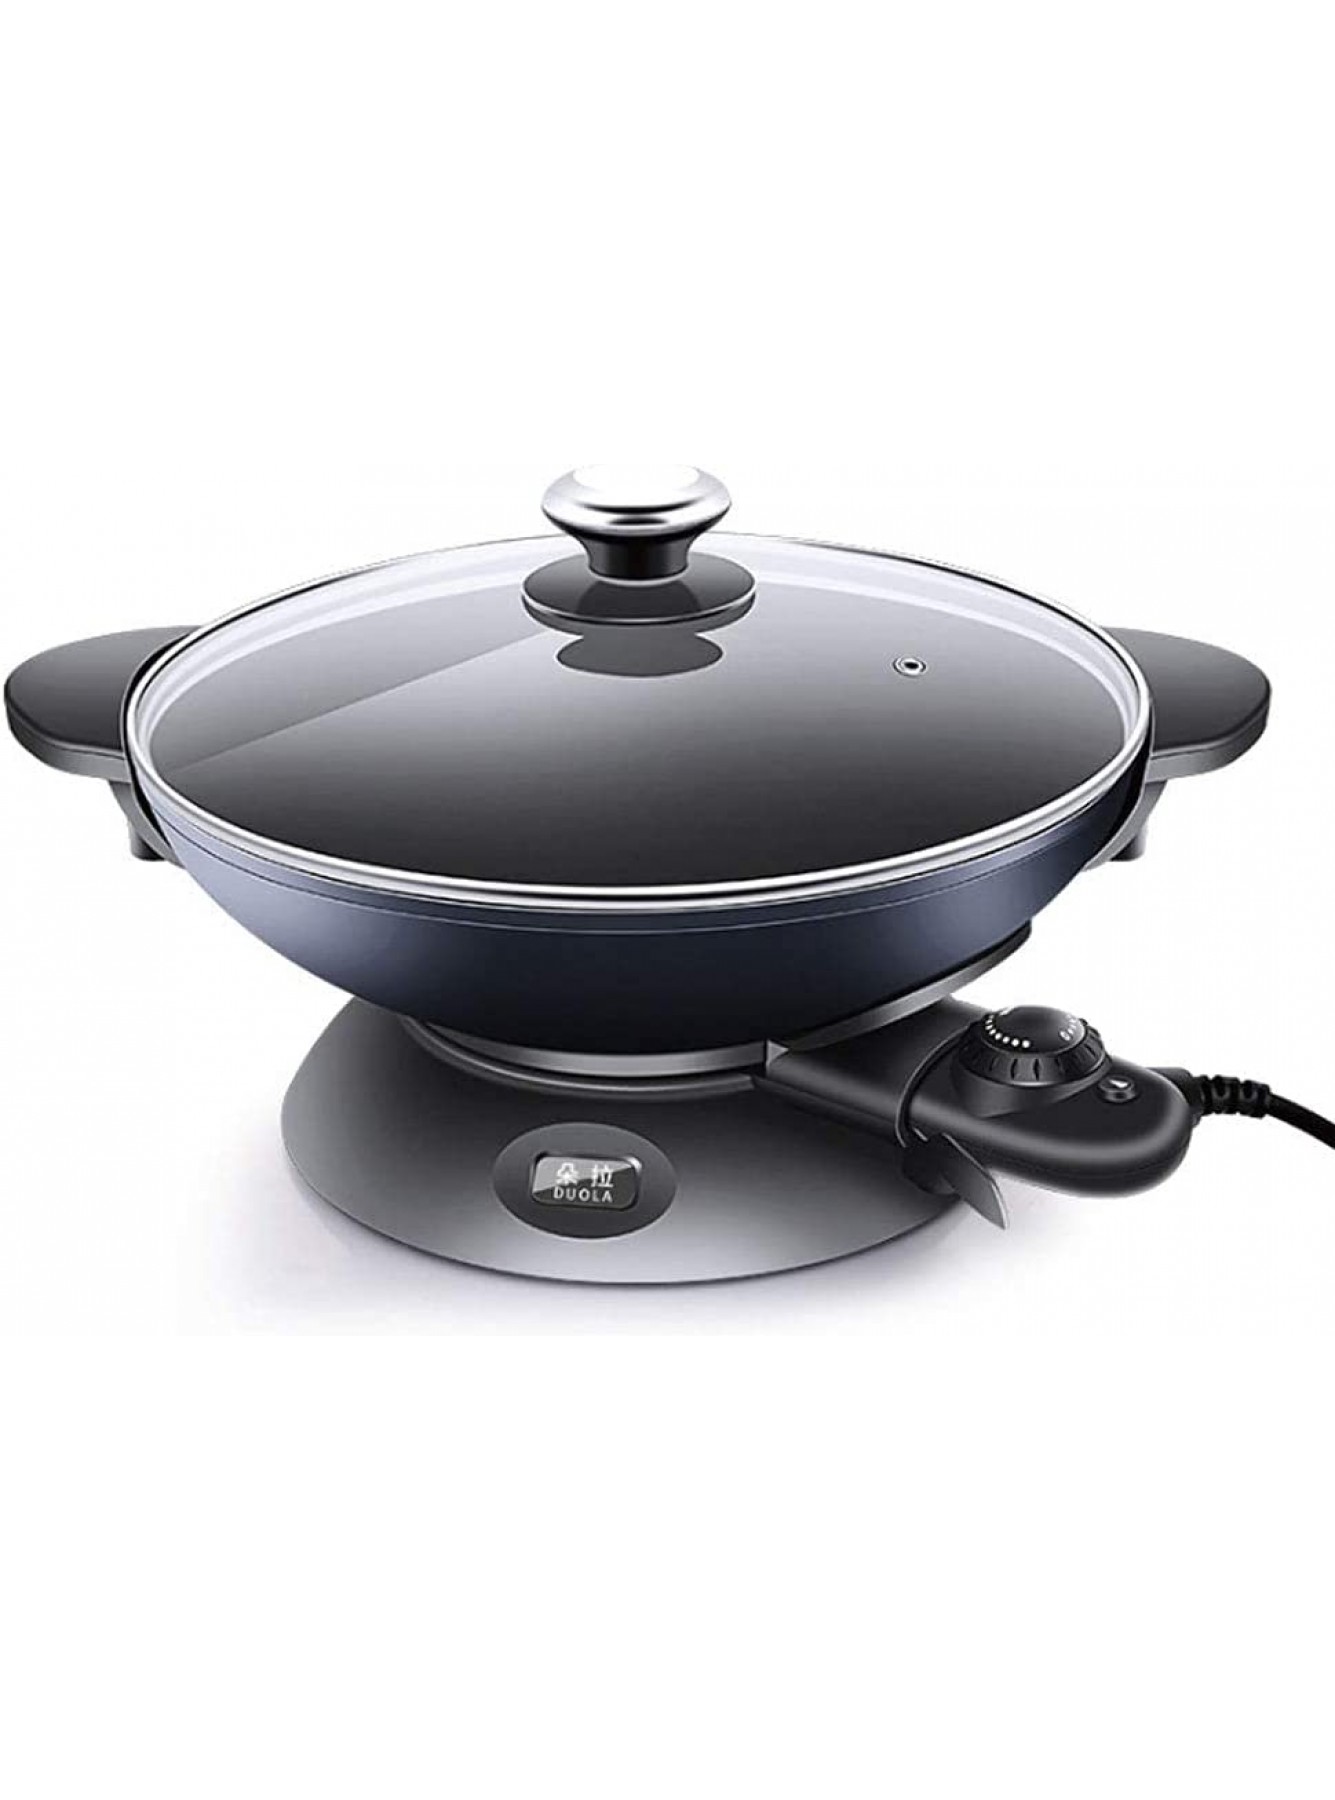 GHJA Electric Wok Home Multi-Function Electricity Pot Non-Stick Integrated Electric Cooker for Kitchen Restaurants - SBLLY3MV